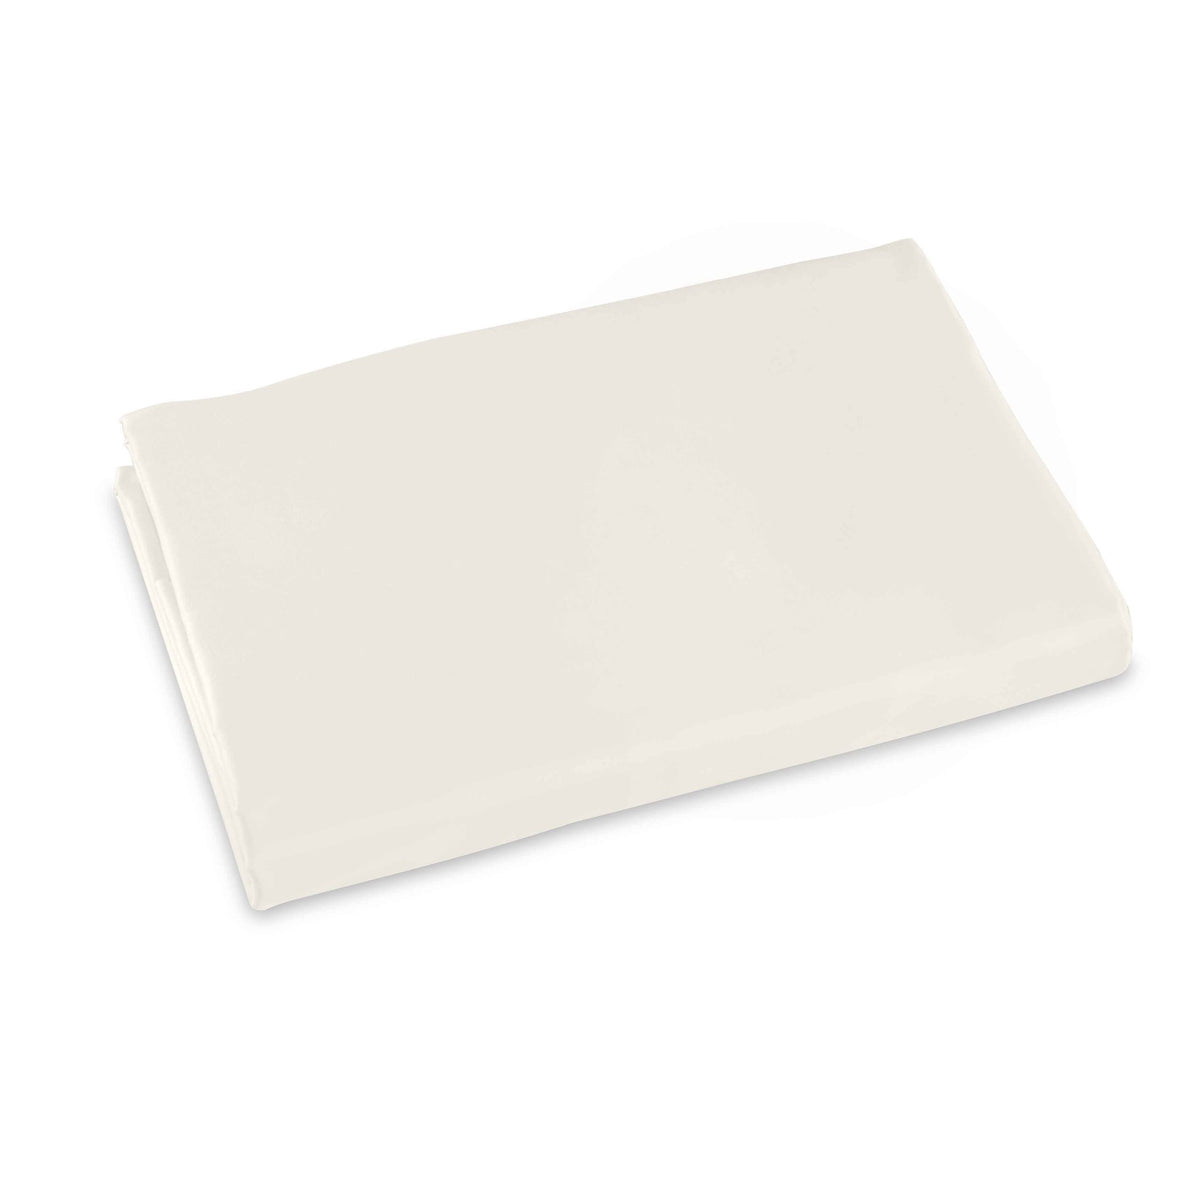 Clear Image of Signoria Raffaello Fitted Sheet in Ivory Color